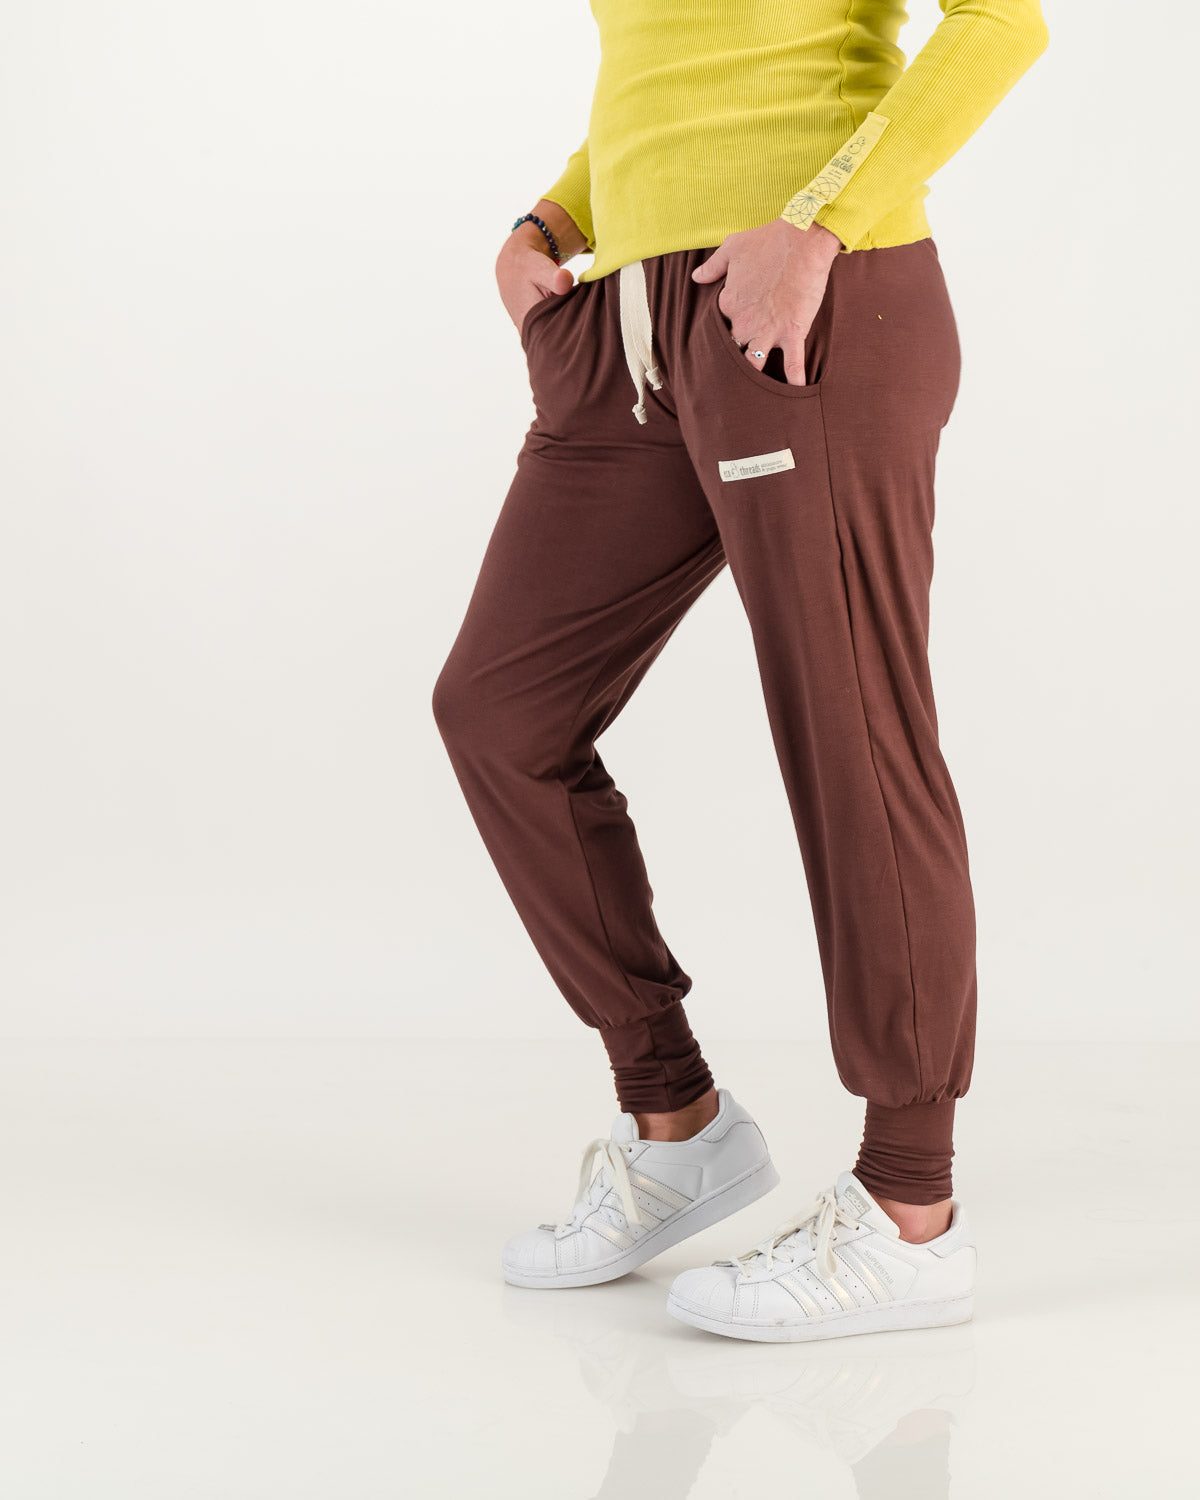 Loose fitting comfy pants, chocolate color